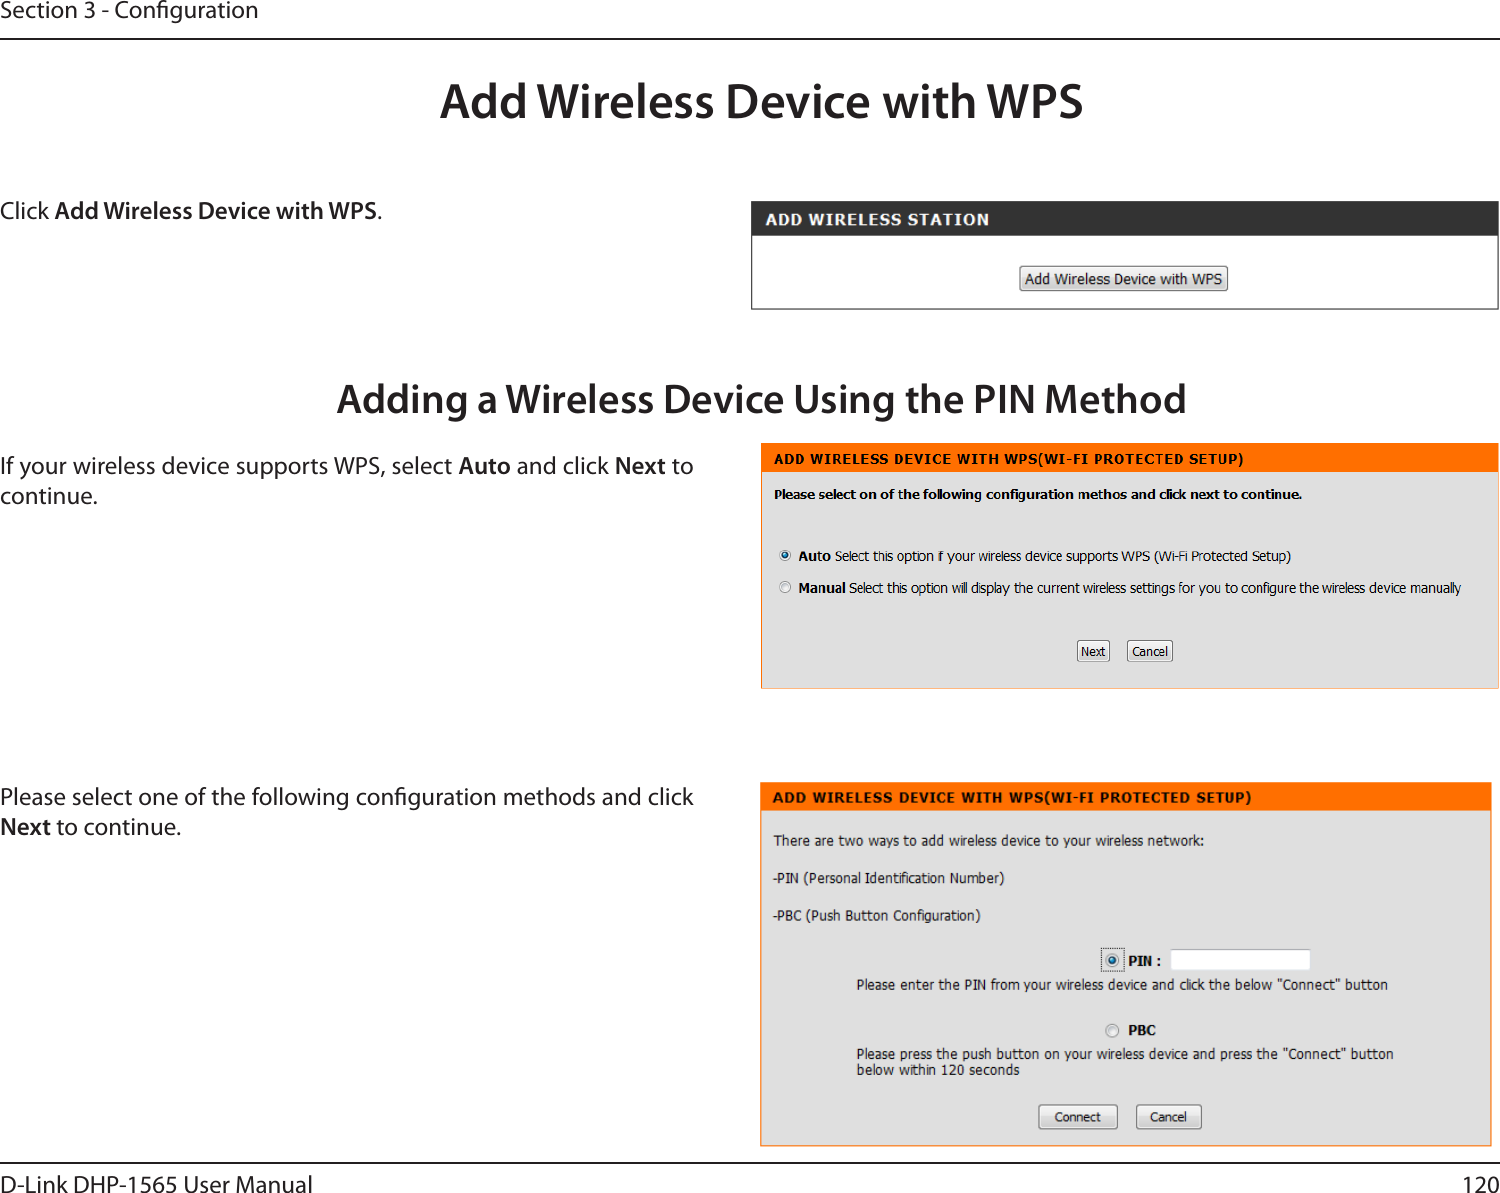 120D-Link DHP-1565 User ManualSection 3 - CongurationAdd Wireless Device with WPSAdding a Wireless Device Using the PIN MethodPlease select one of the following conguration methods and click Next to continue. Click Add Wireless Device with WPS. If your wireless device supports WPS, select Auto and click Next to continue. 